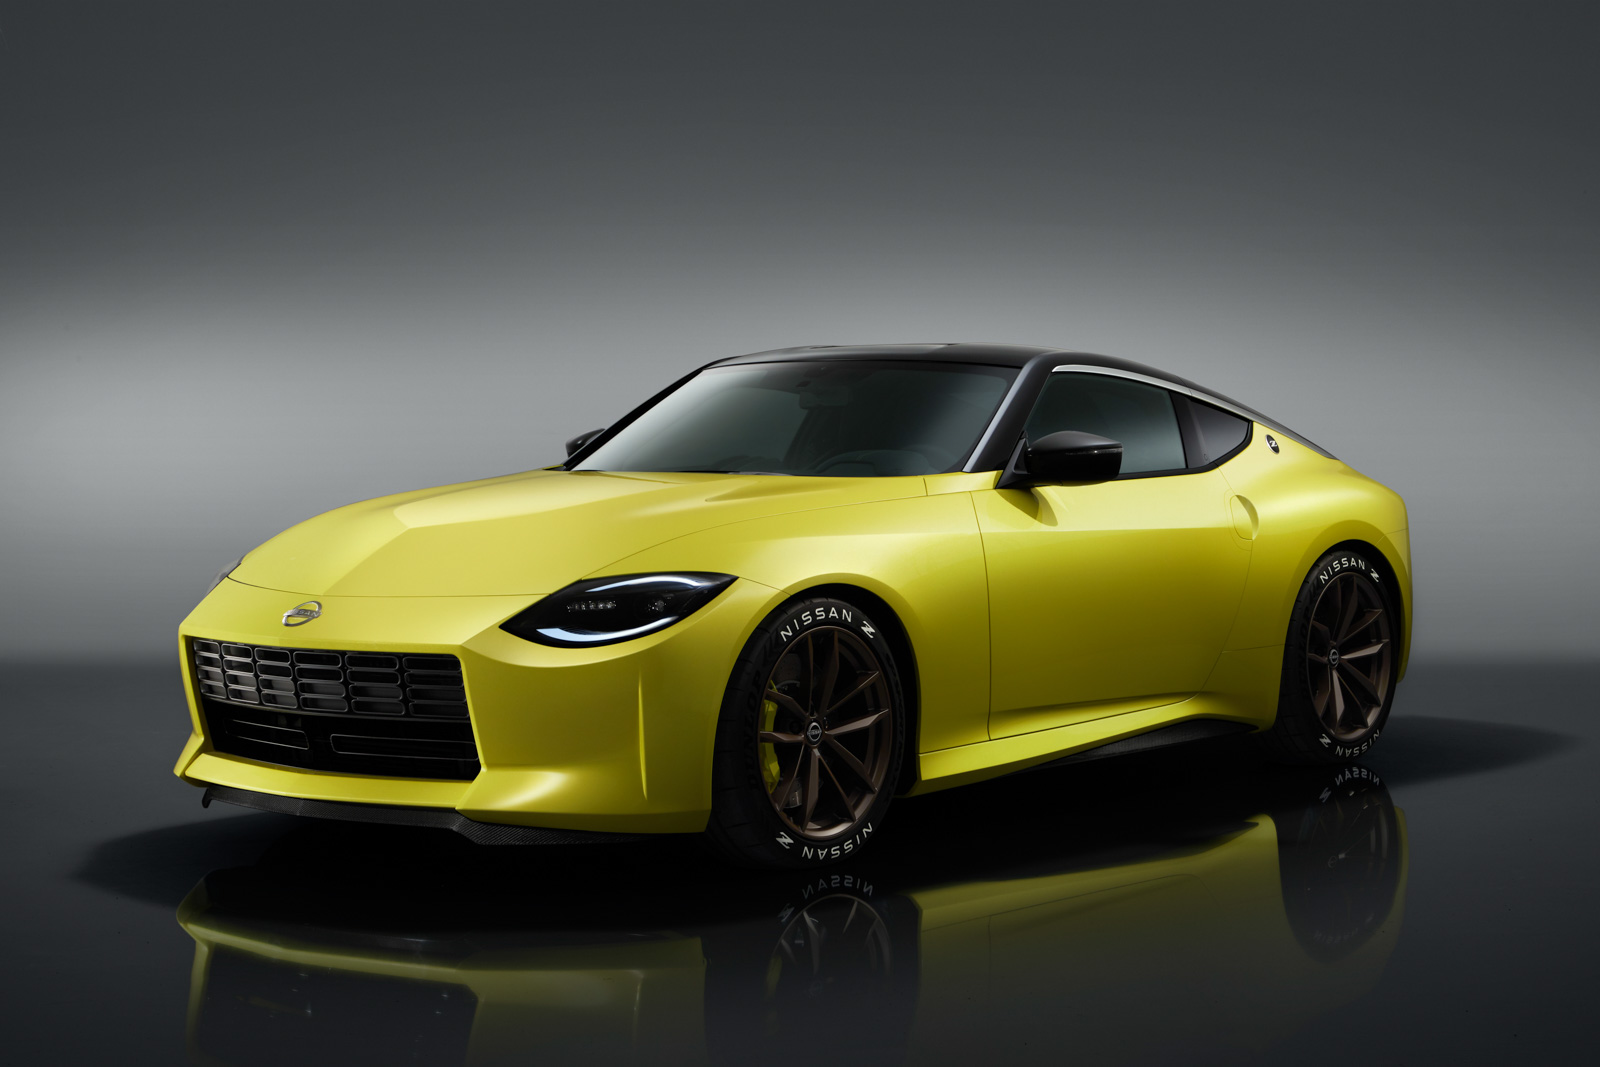 The New Nissan Z Proto Is Pretty Much Exactly What I Wanted: Old School